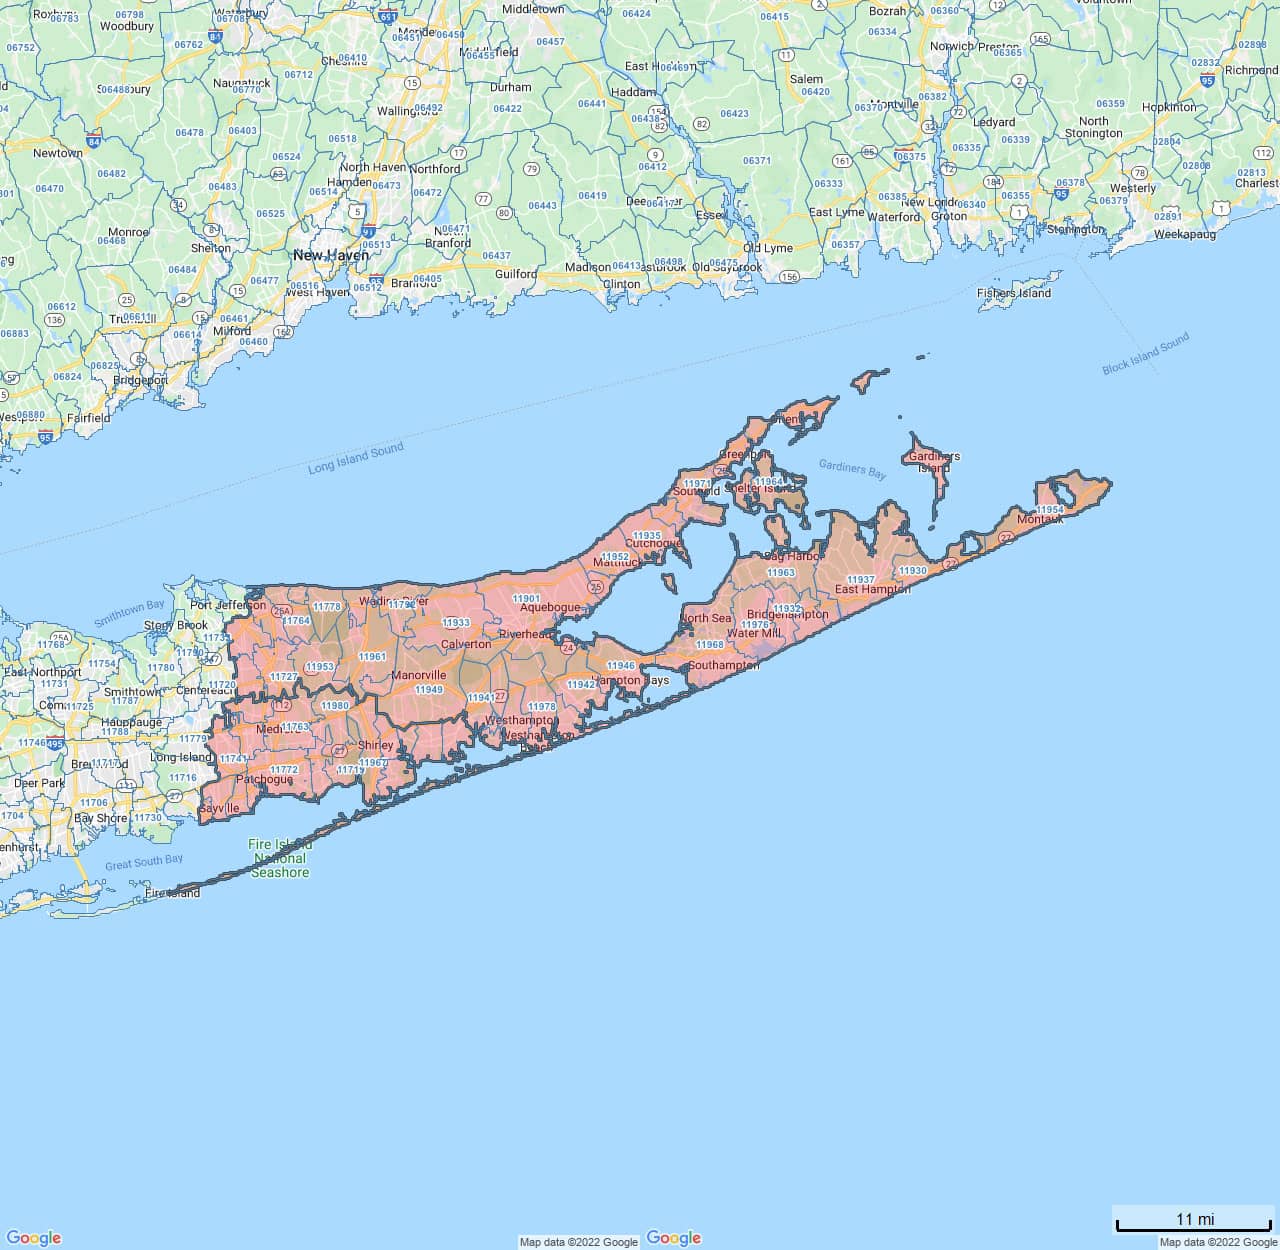 All Dry Services Area Coverage Map for East End of Long Island, NY